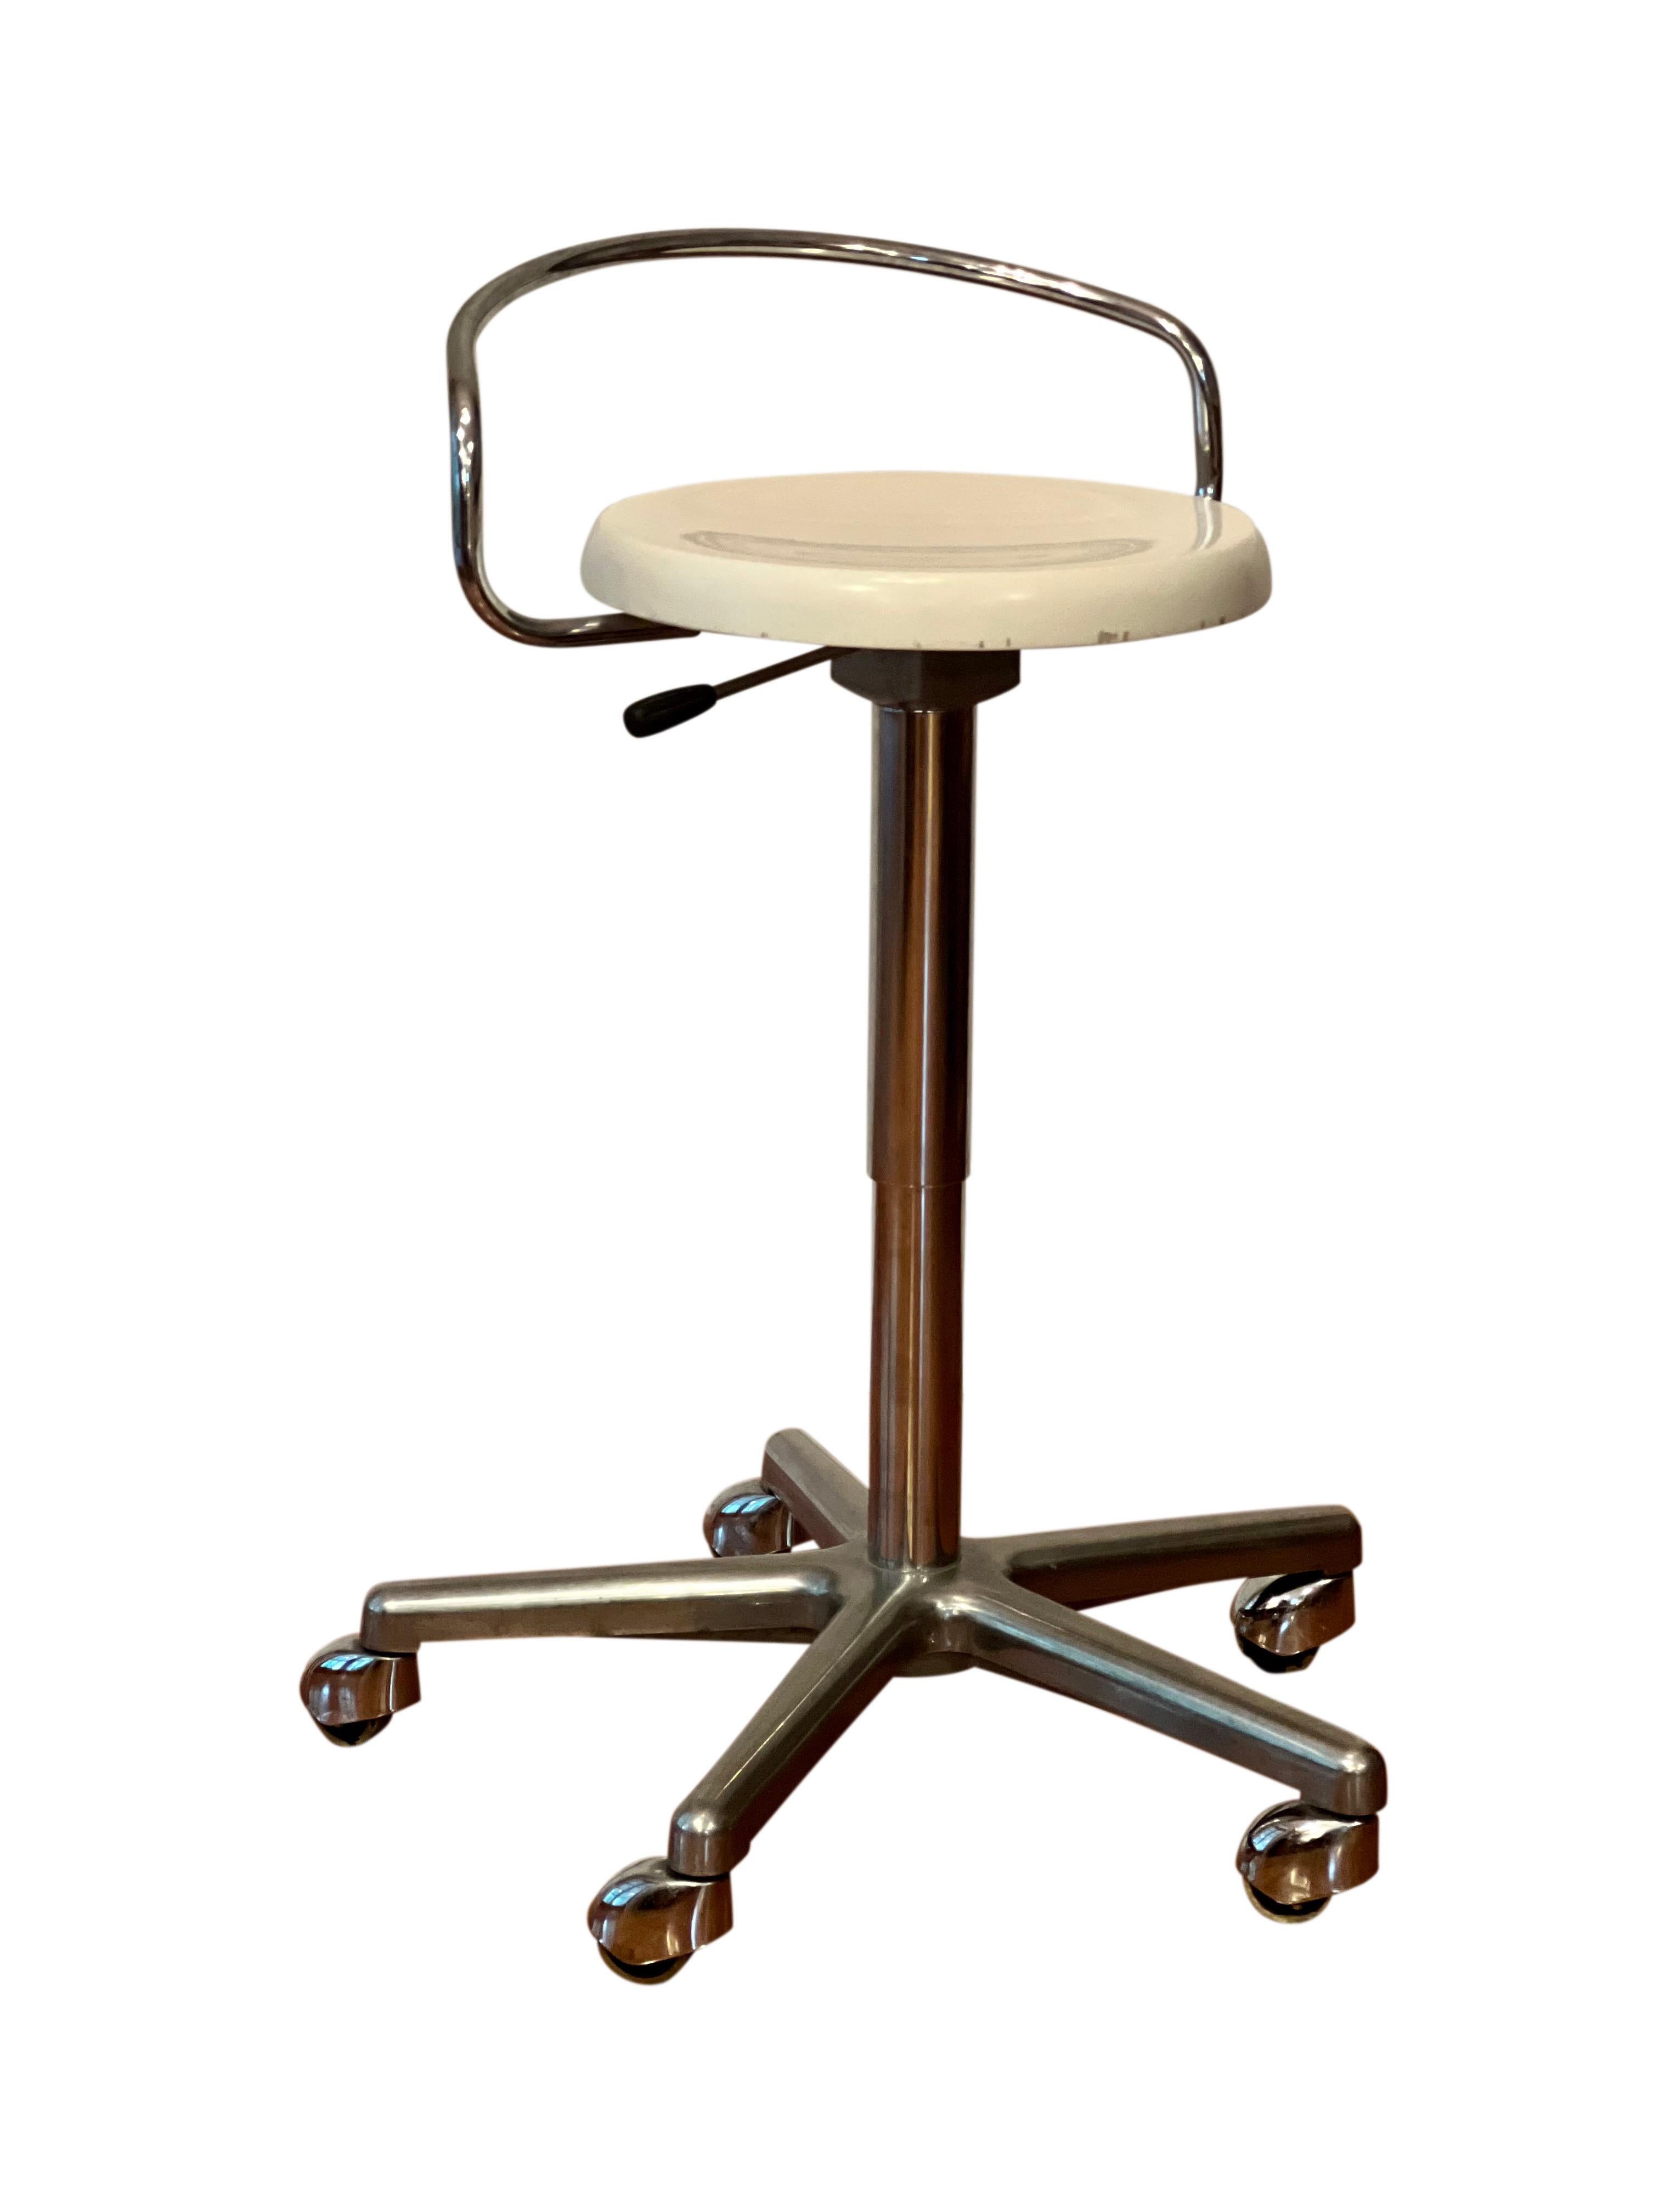 1970's swivel adjustable height rolling work stool.

Features a white lacquered wood seat with curved backrest on a shiny chrome base.  The seat swivels 360 degrees and adjusts from chair to bar height, 19.5